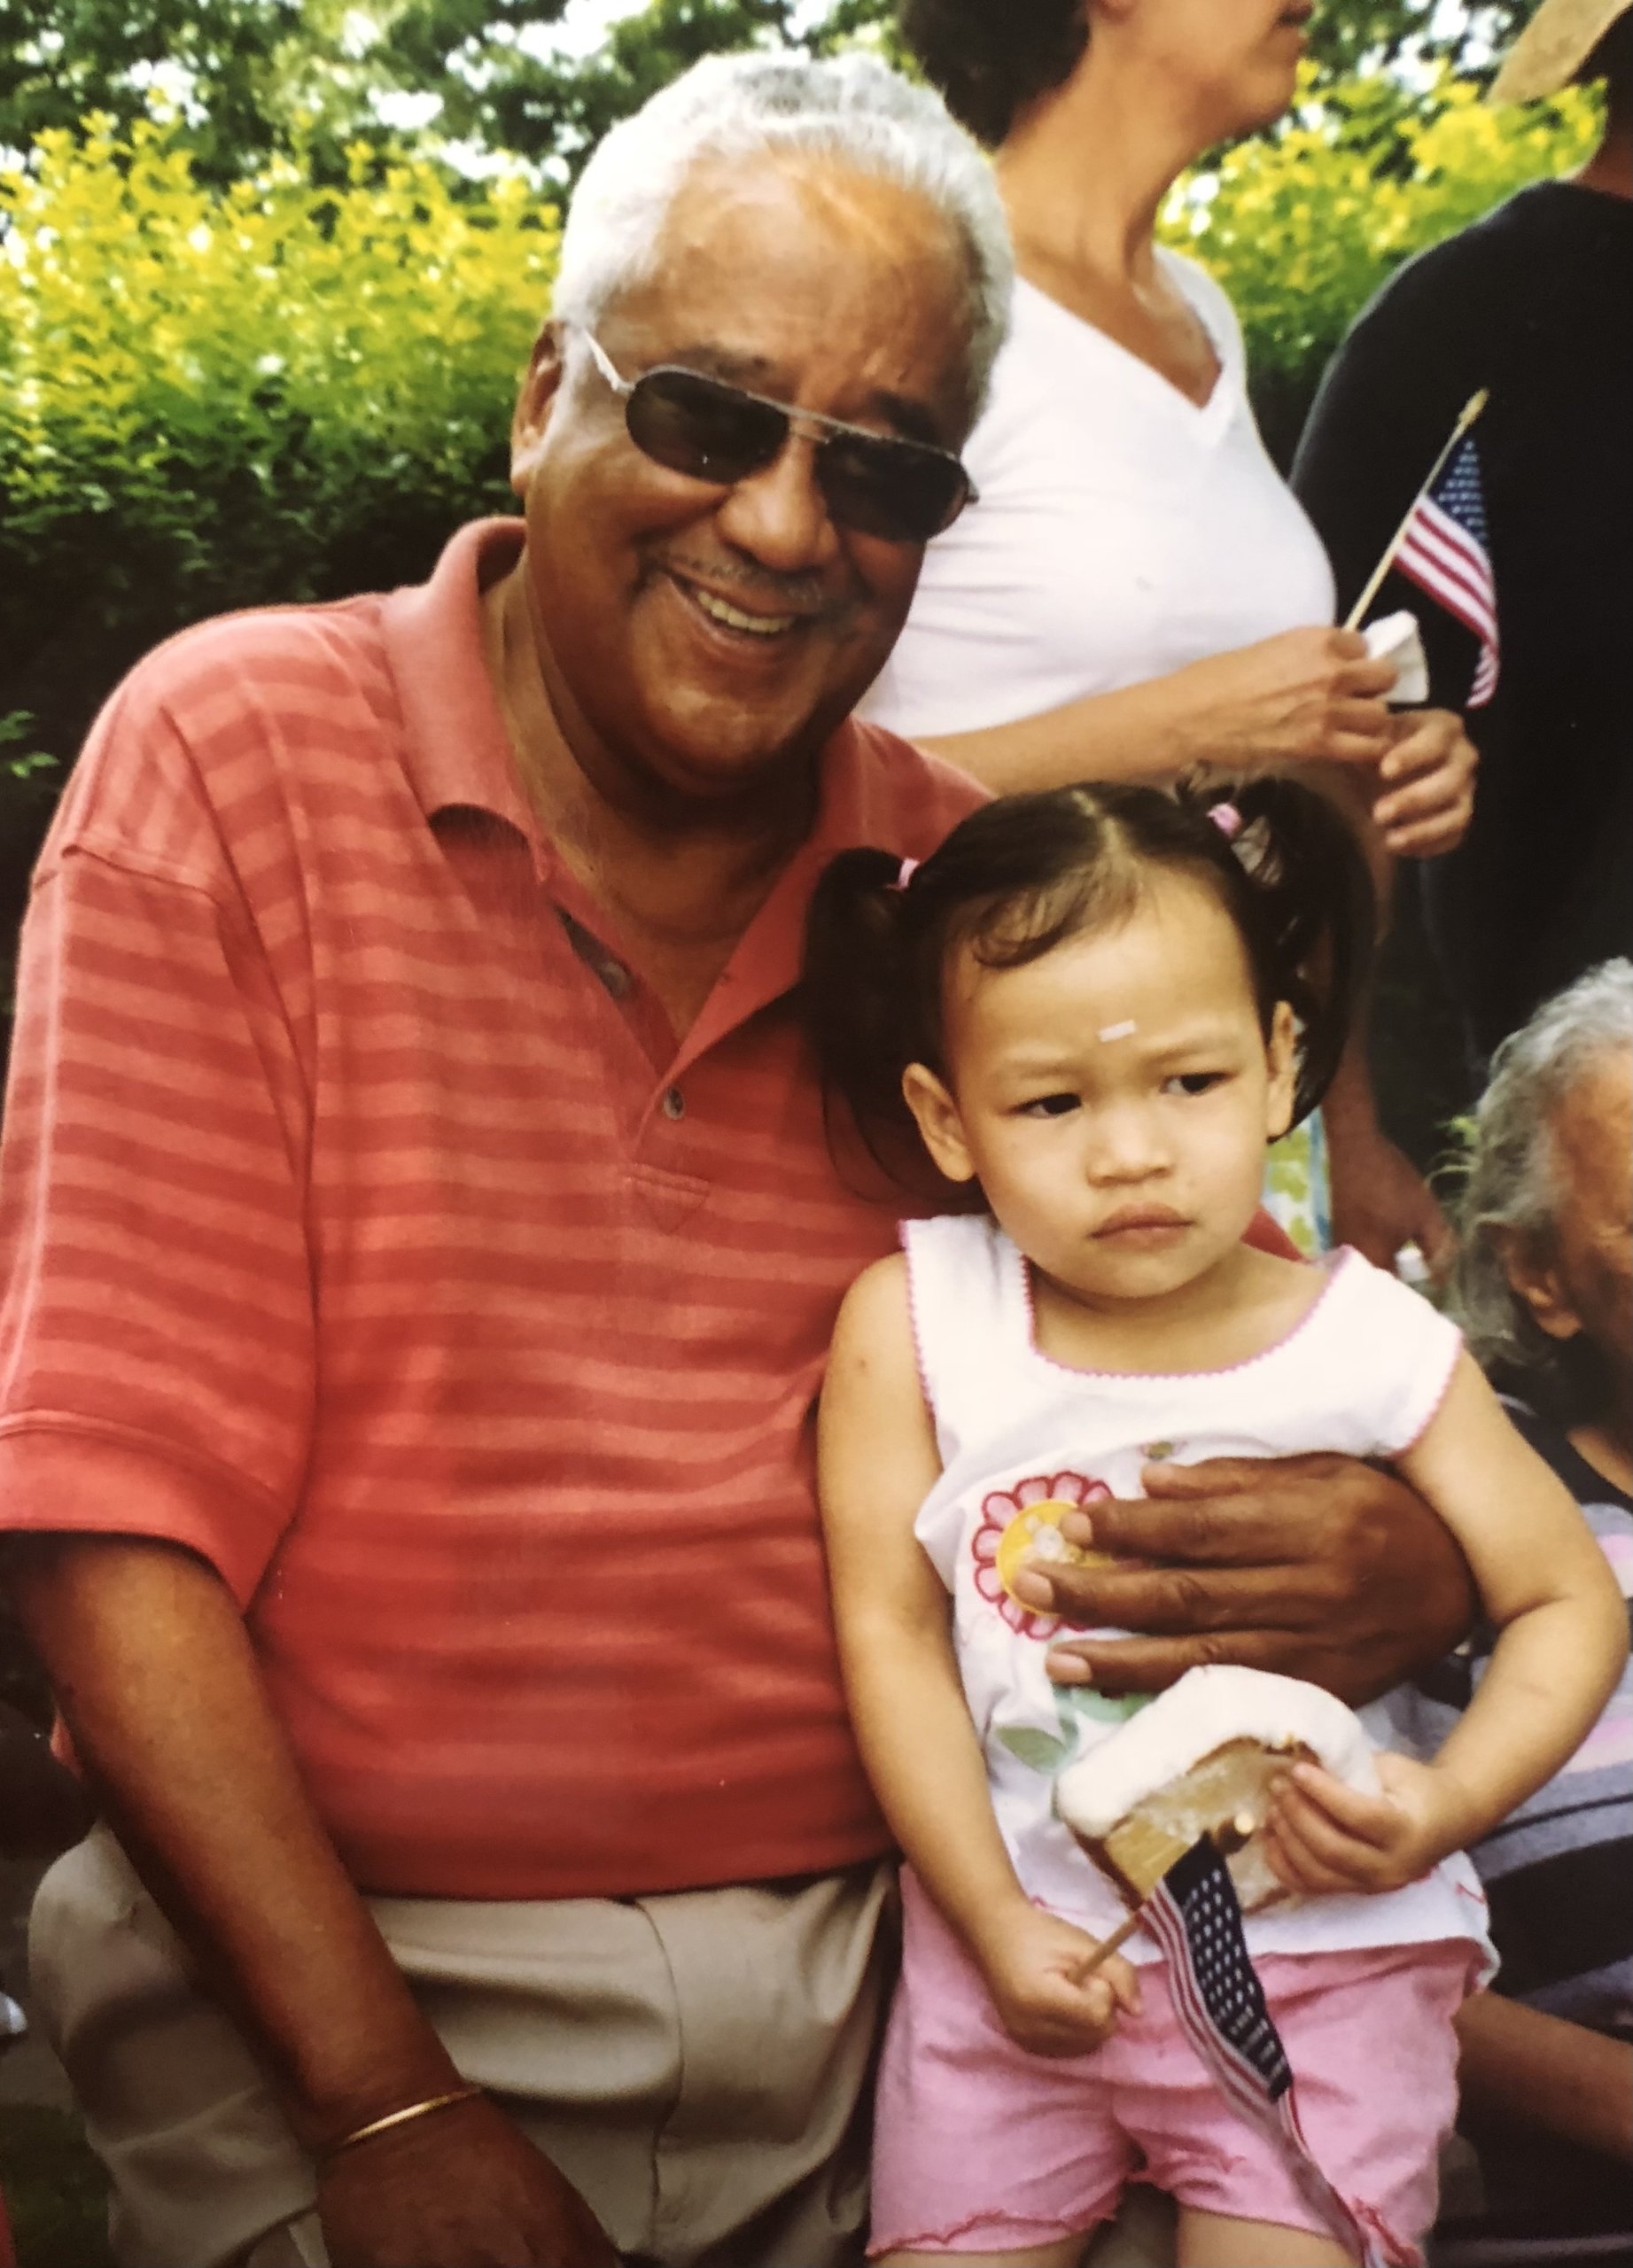 A young Asia Cofield on the lap of her grandfather, Donald Williams Sr.